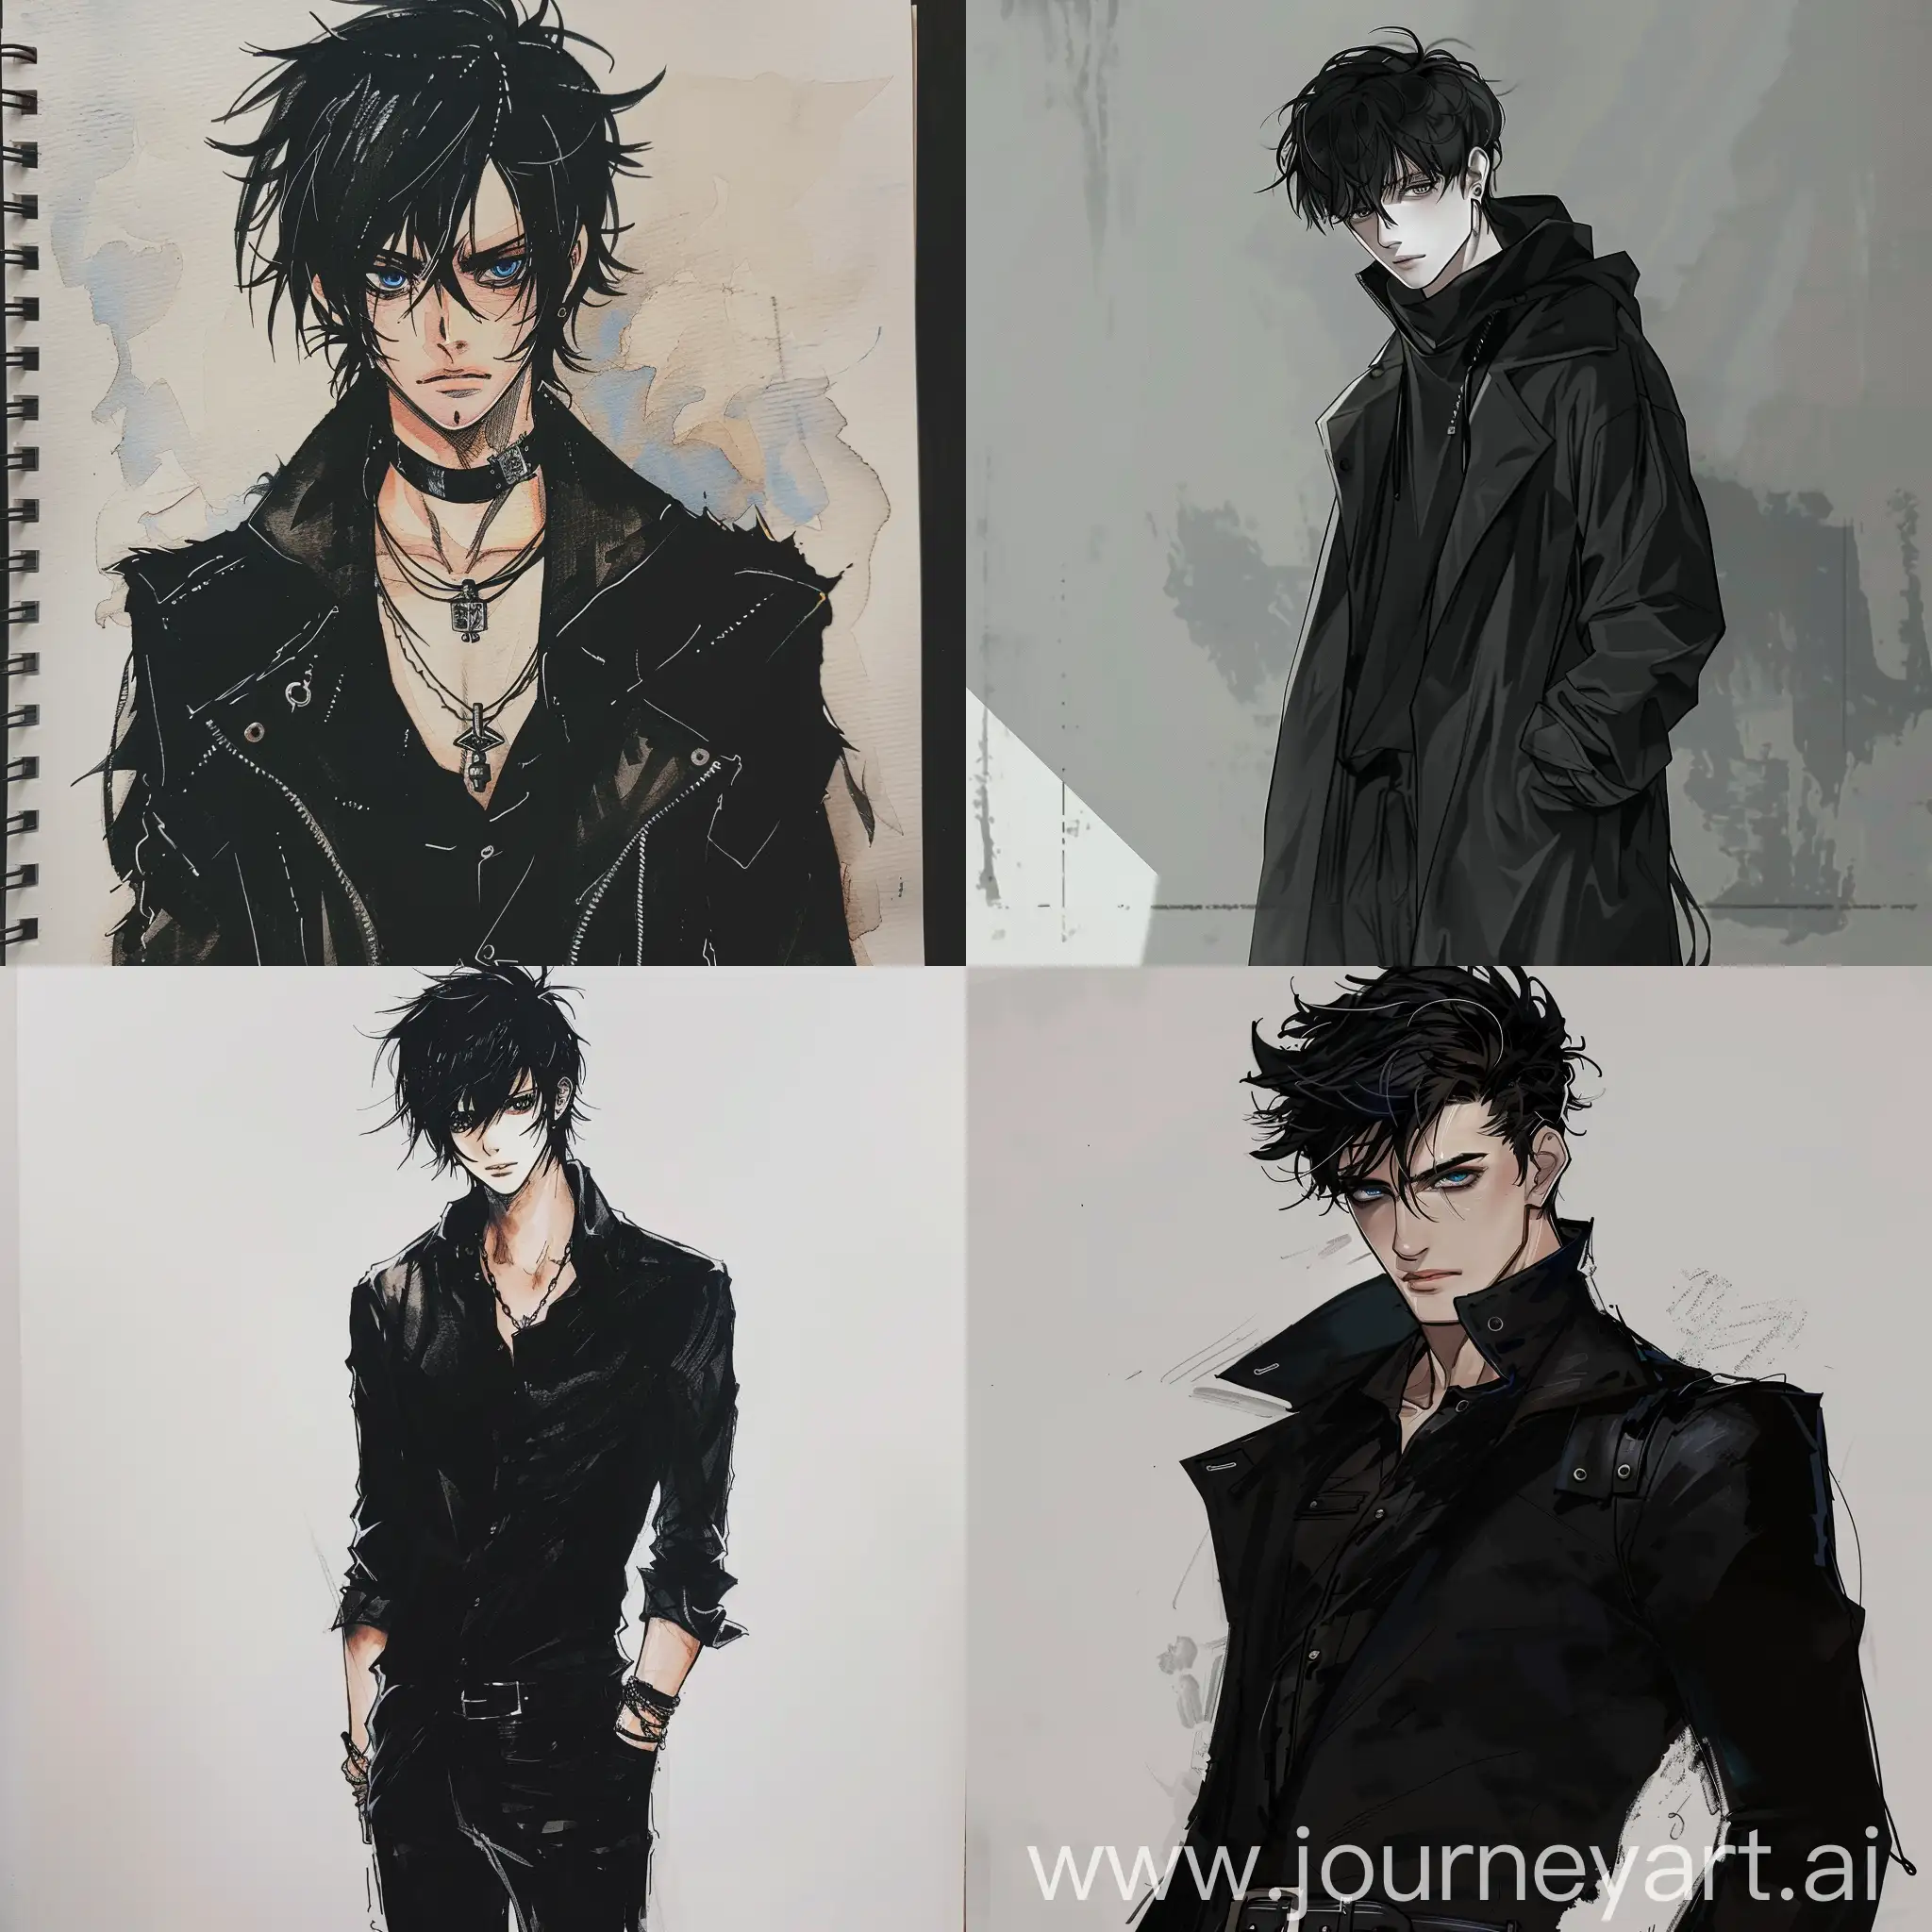 Tall-Manga-Character-with-Black-Hair-in-Stylish-Outfit-and-Blue-Eyes